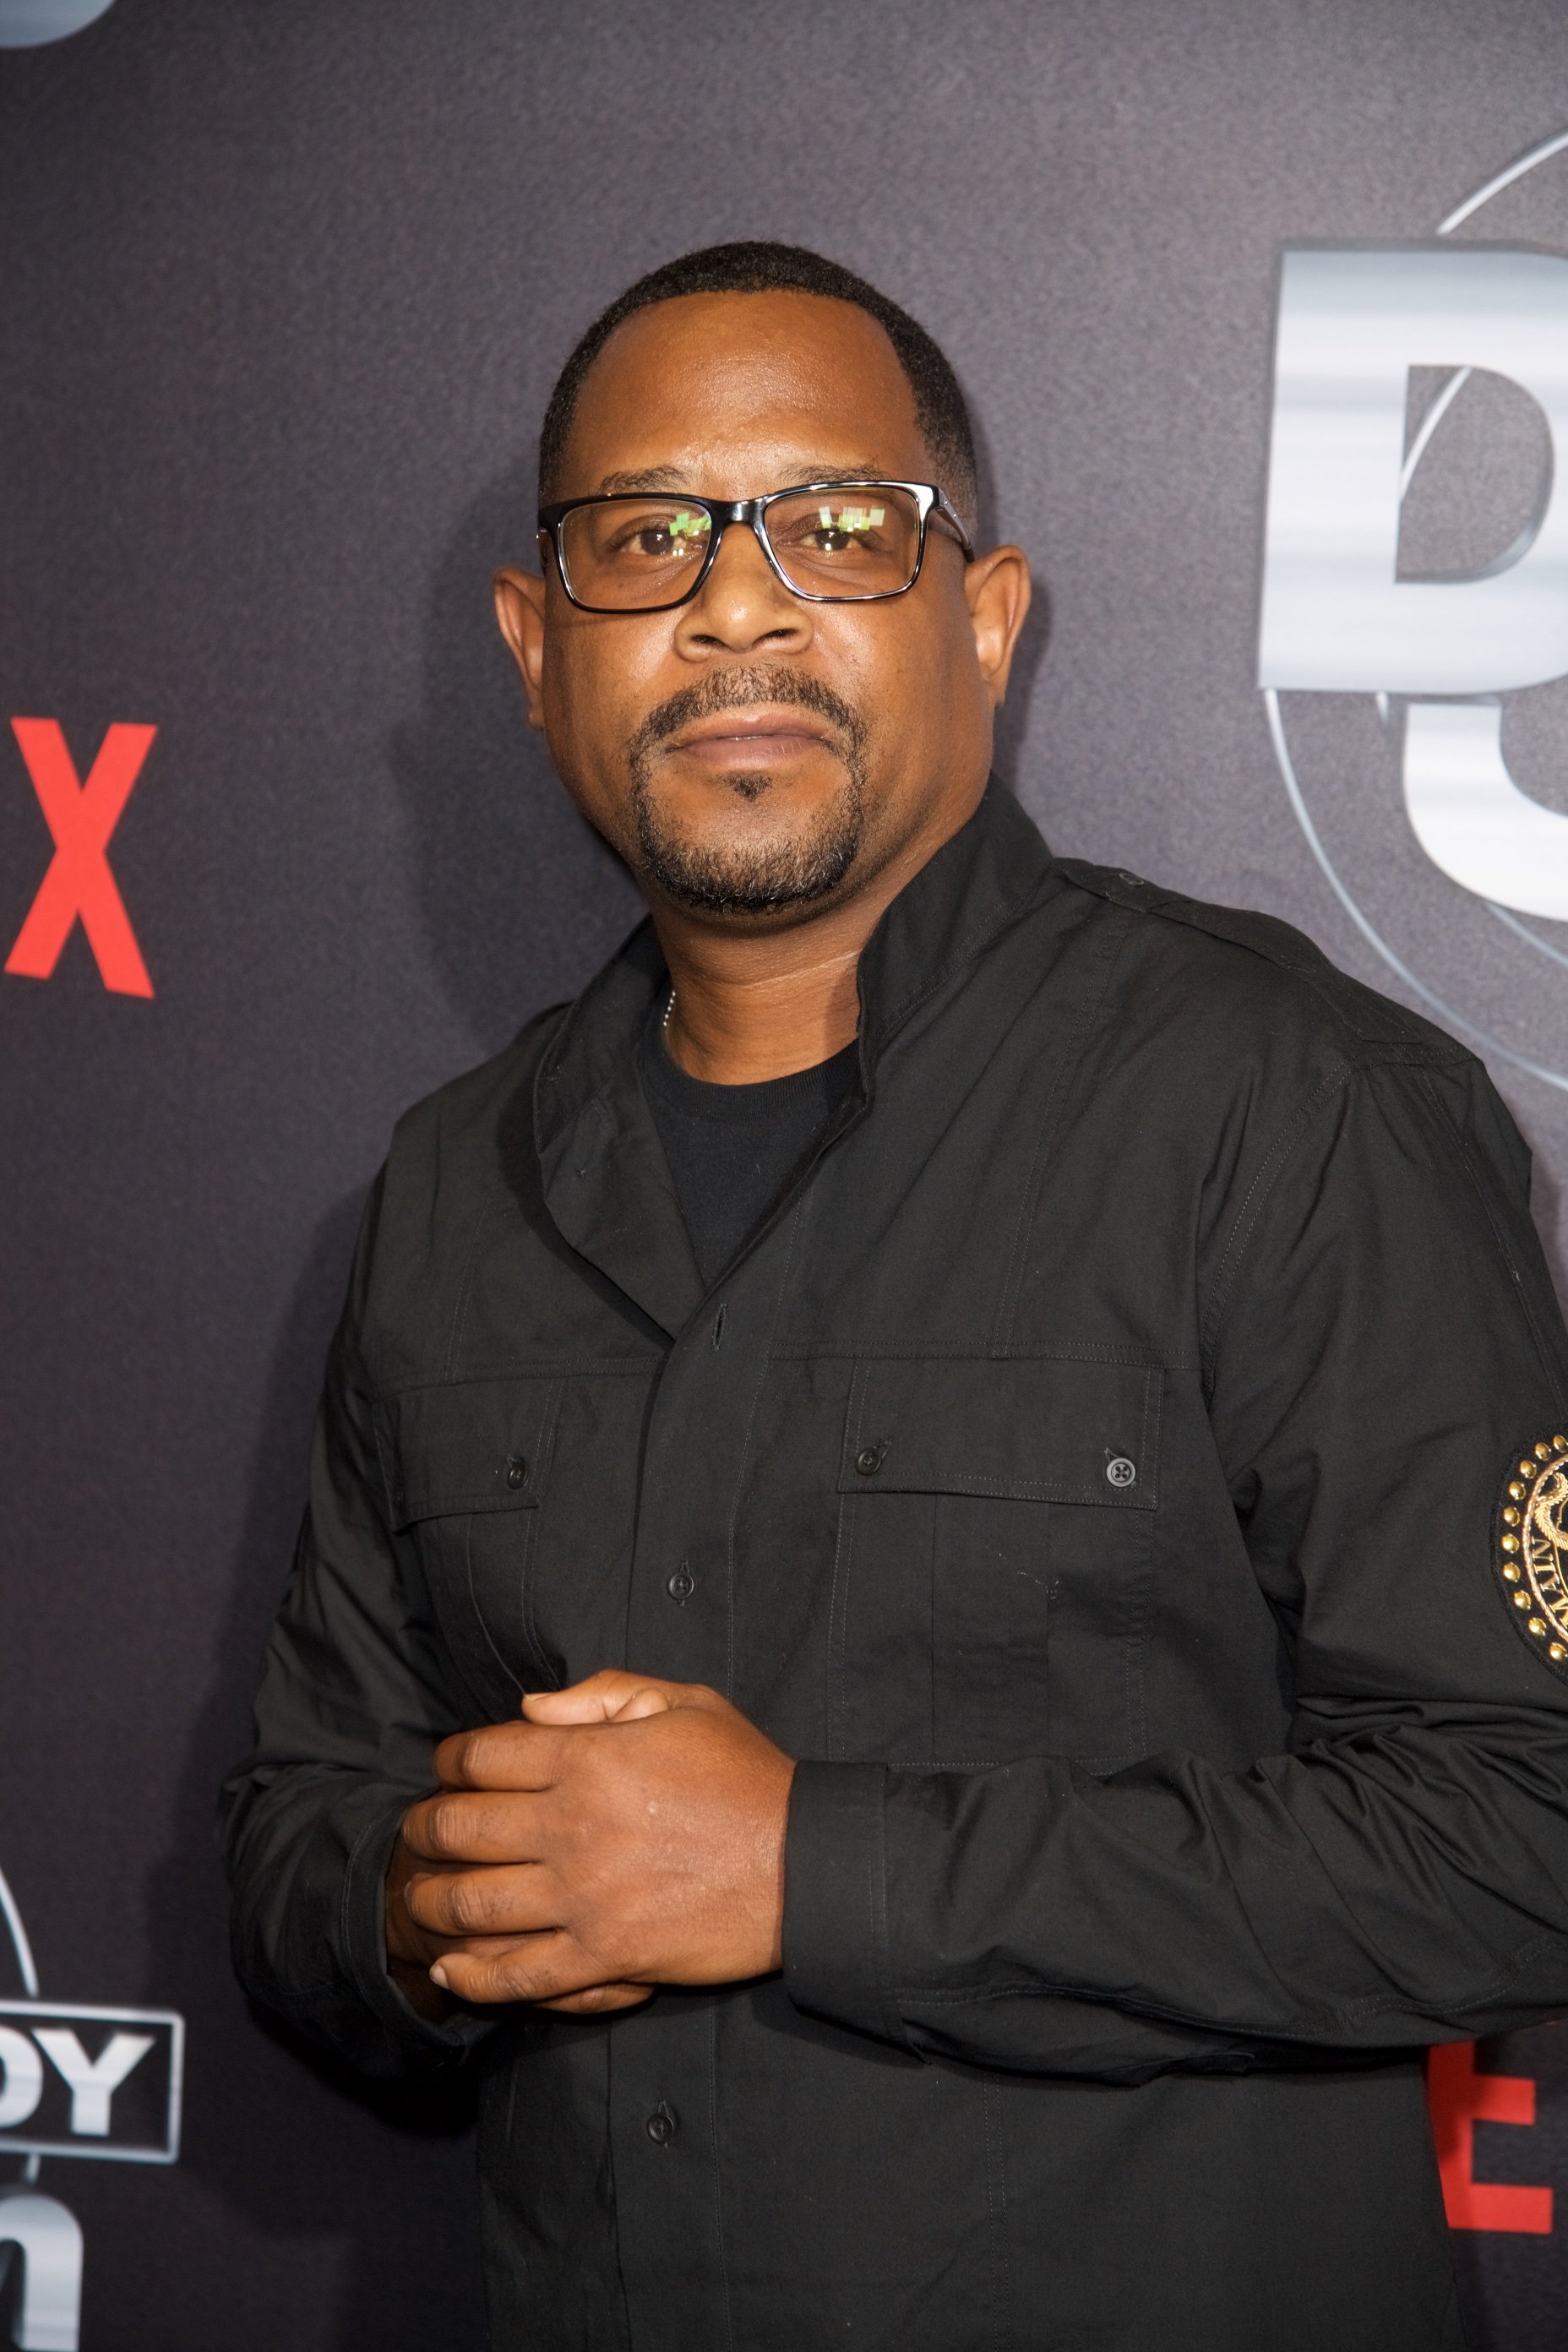 Martin Lawrence at Netflix Presents Russell Simmons "Def Comedy Jam 25" Special Event on Sept. 10, 2017 in California | Photo: Getty Images